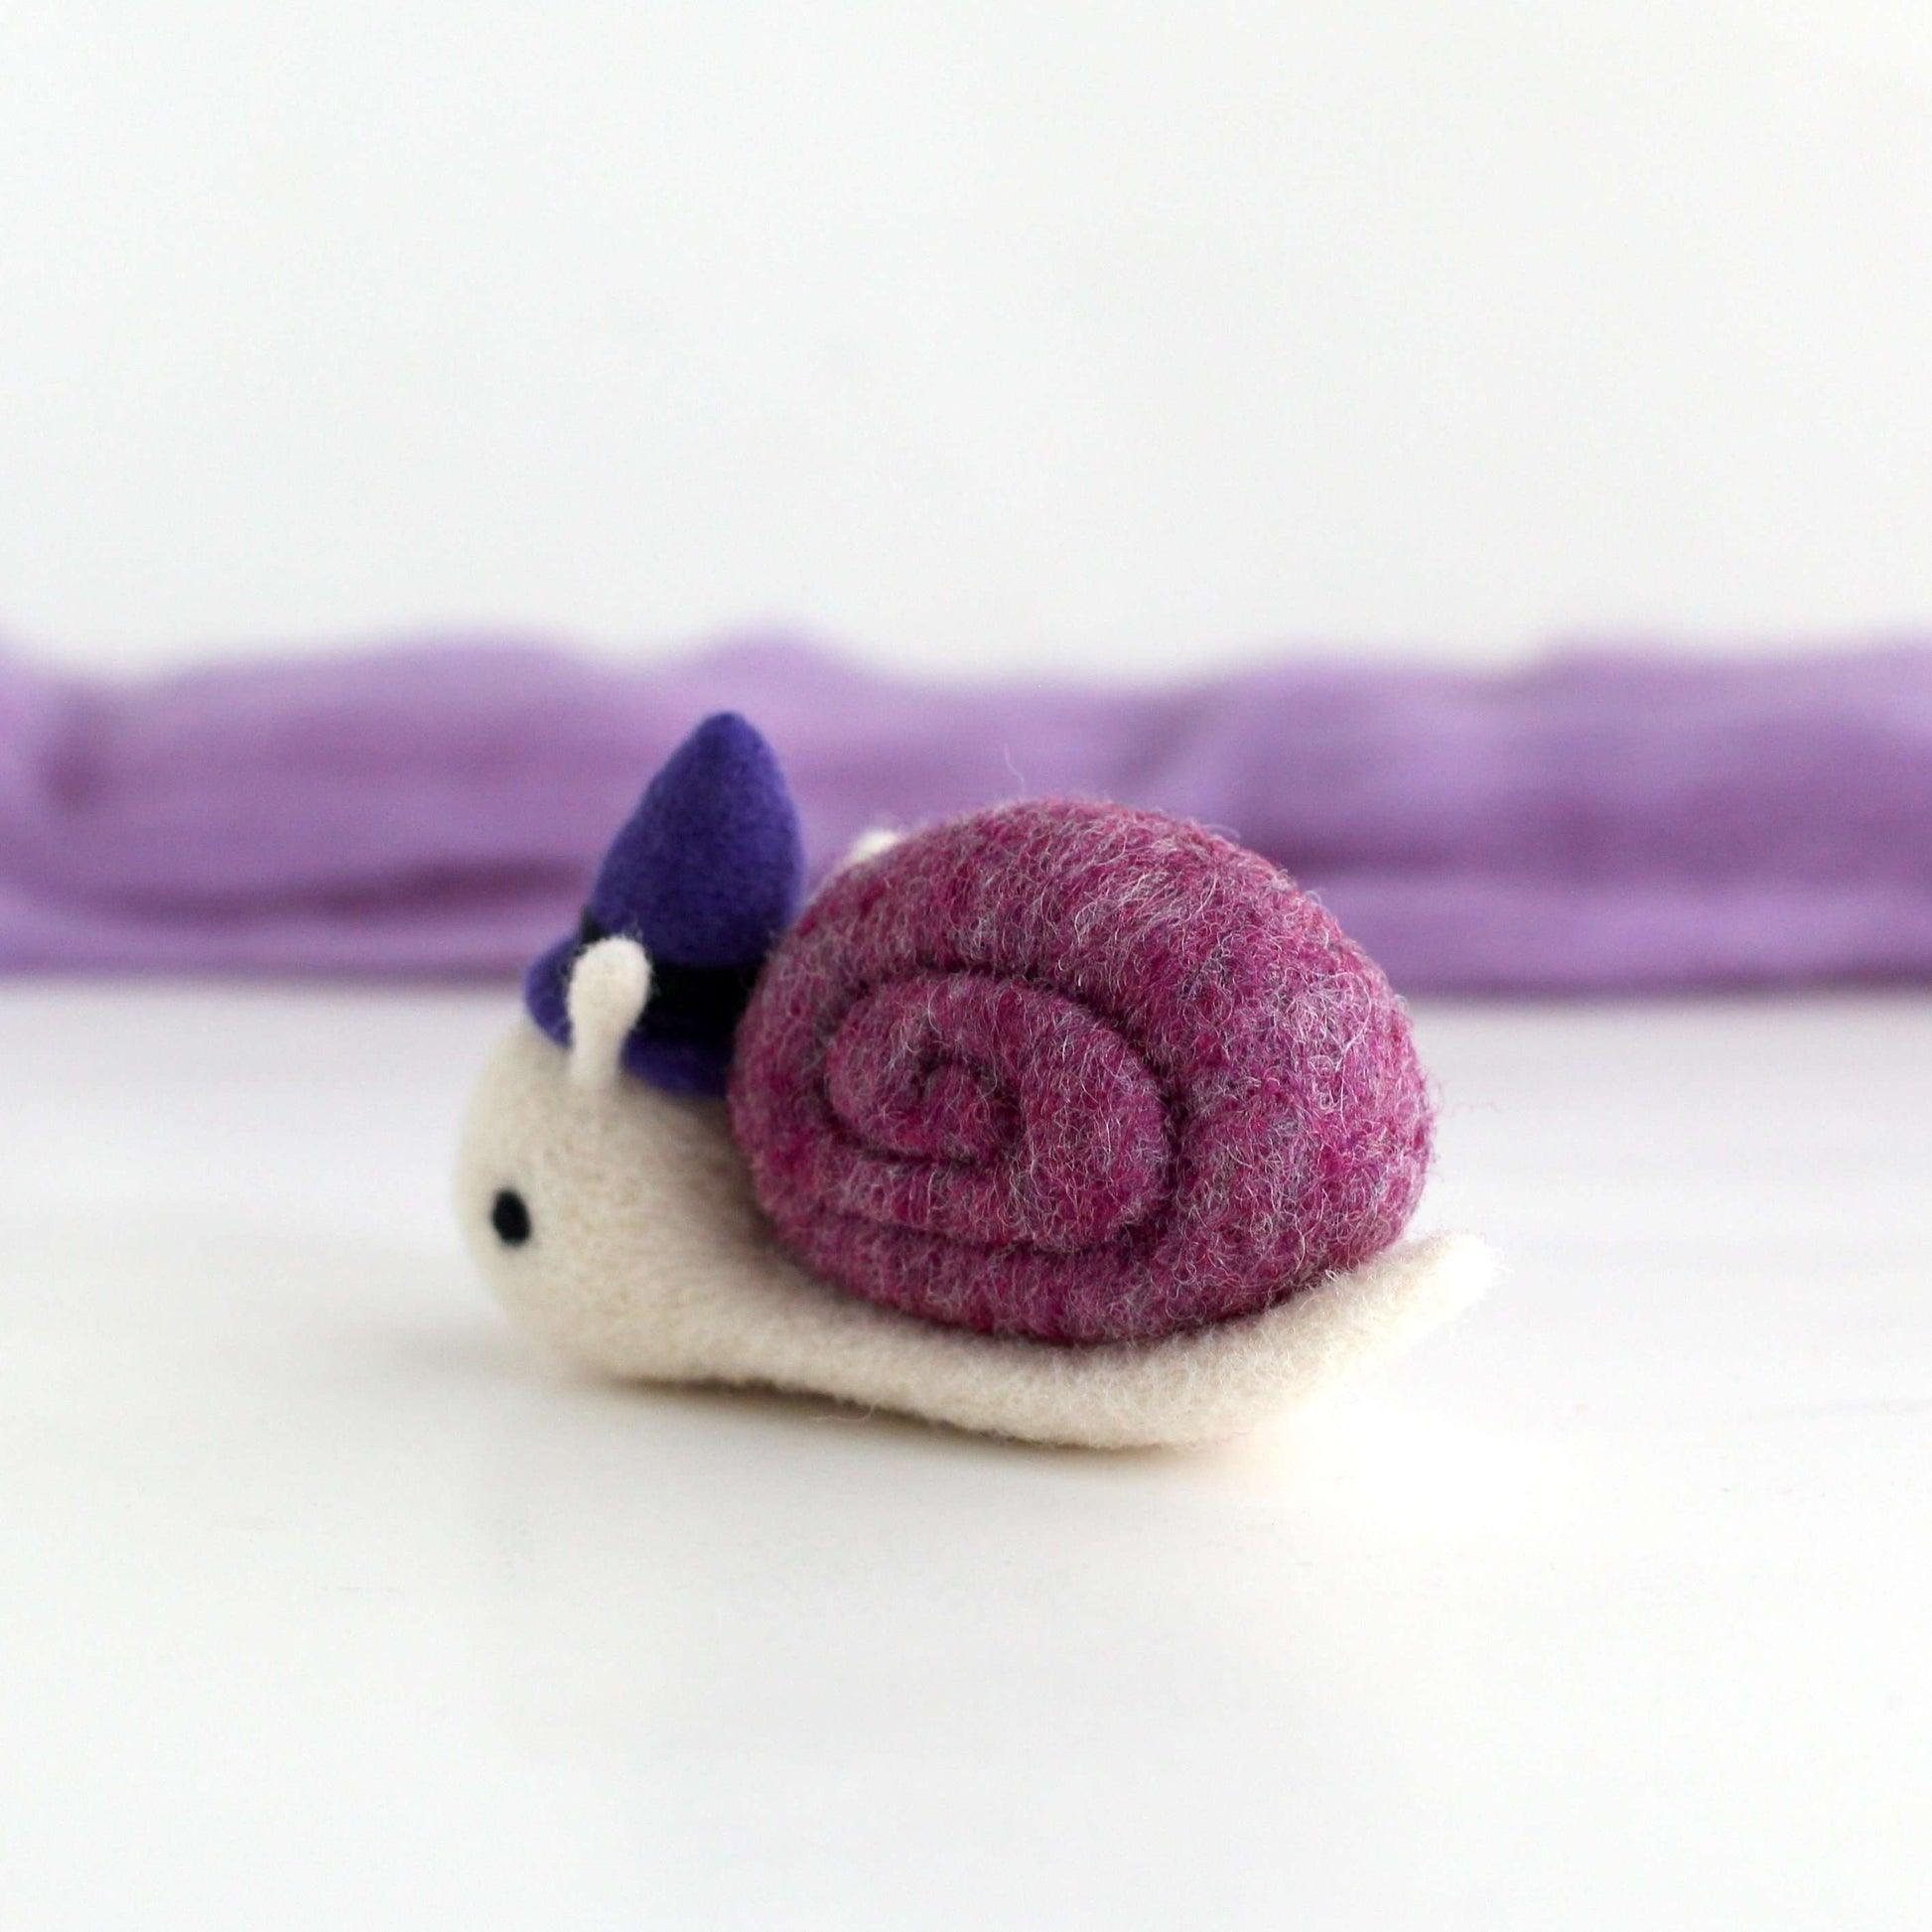 Needle Felted Snail Witch by Wild Whimsy Woolies